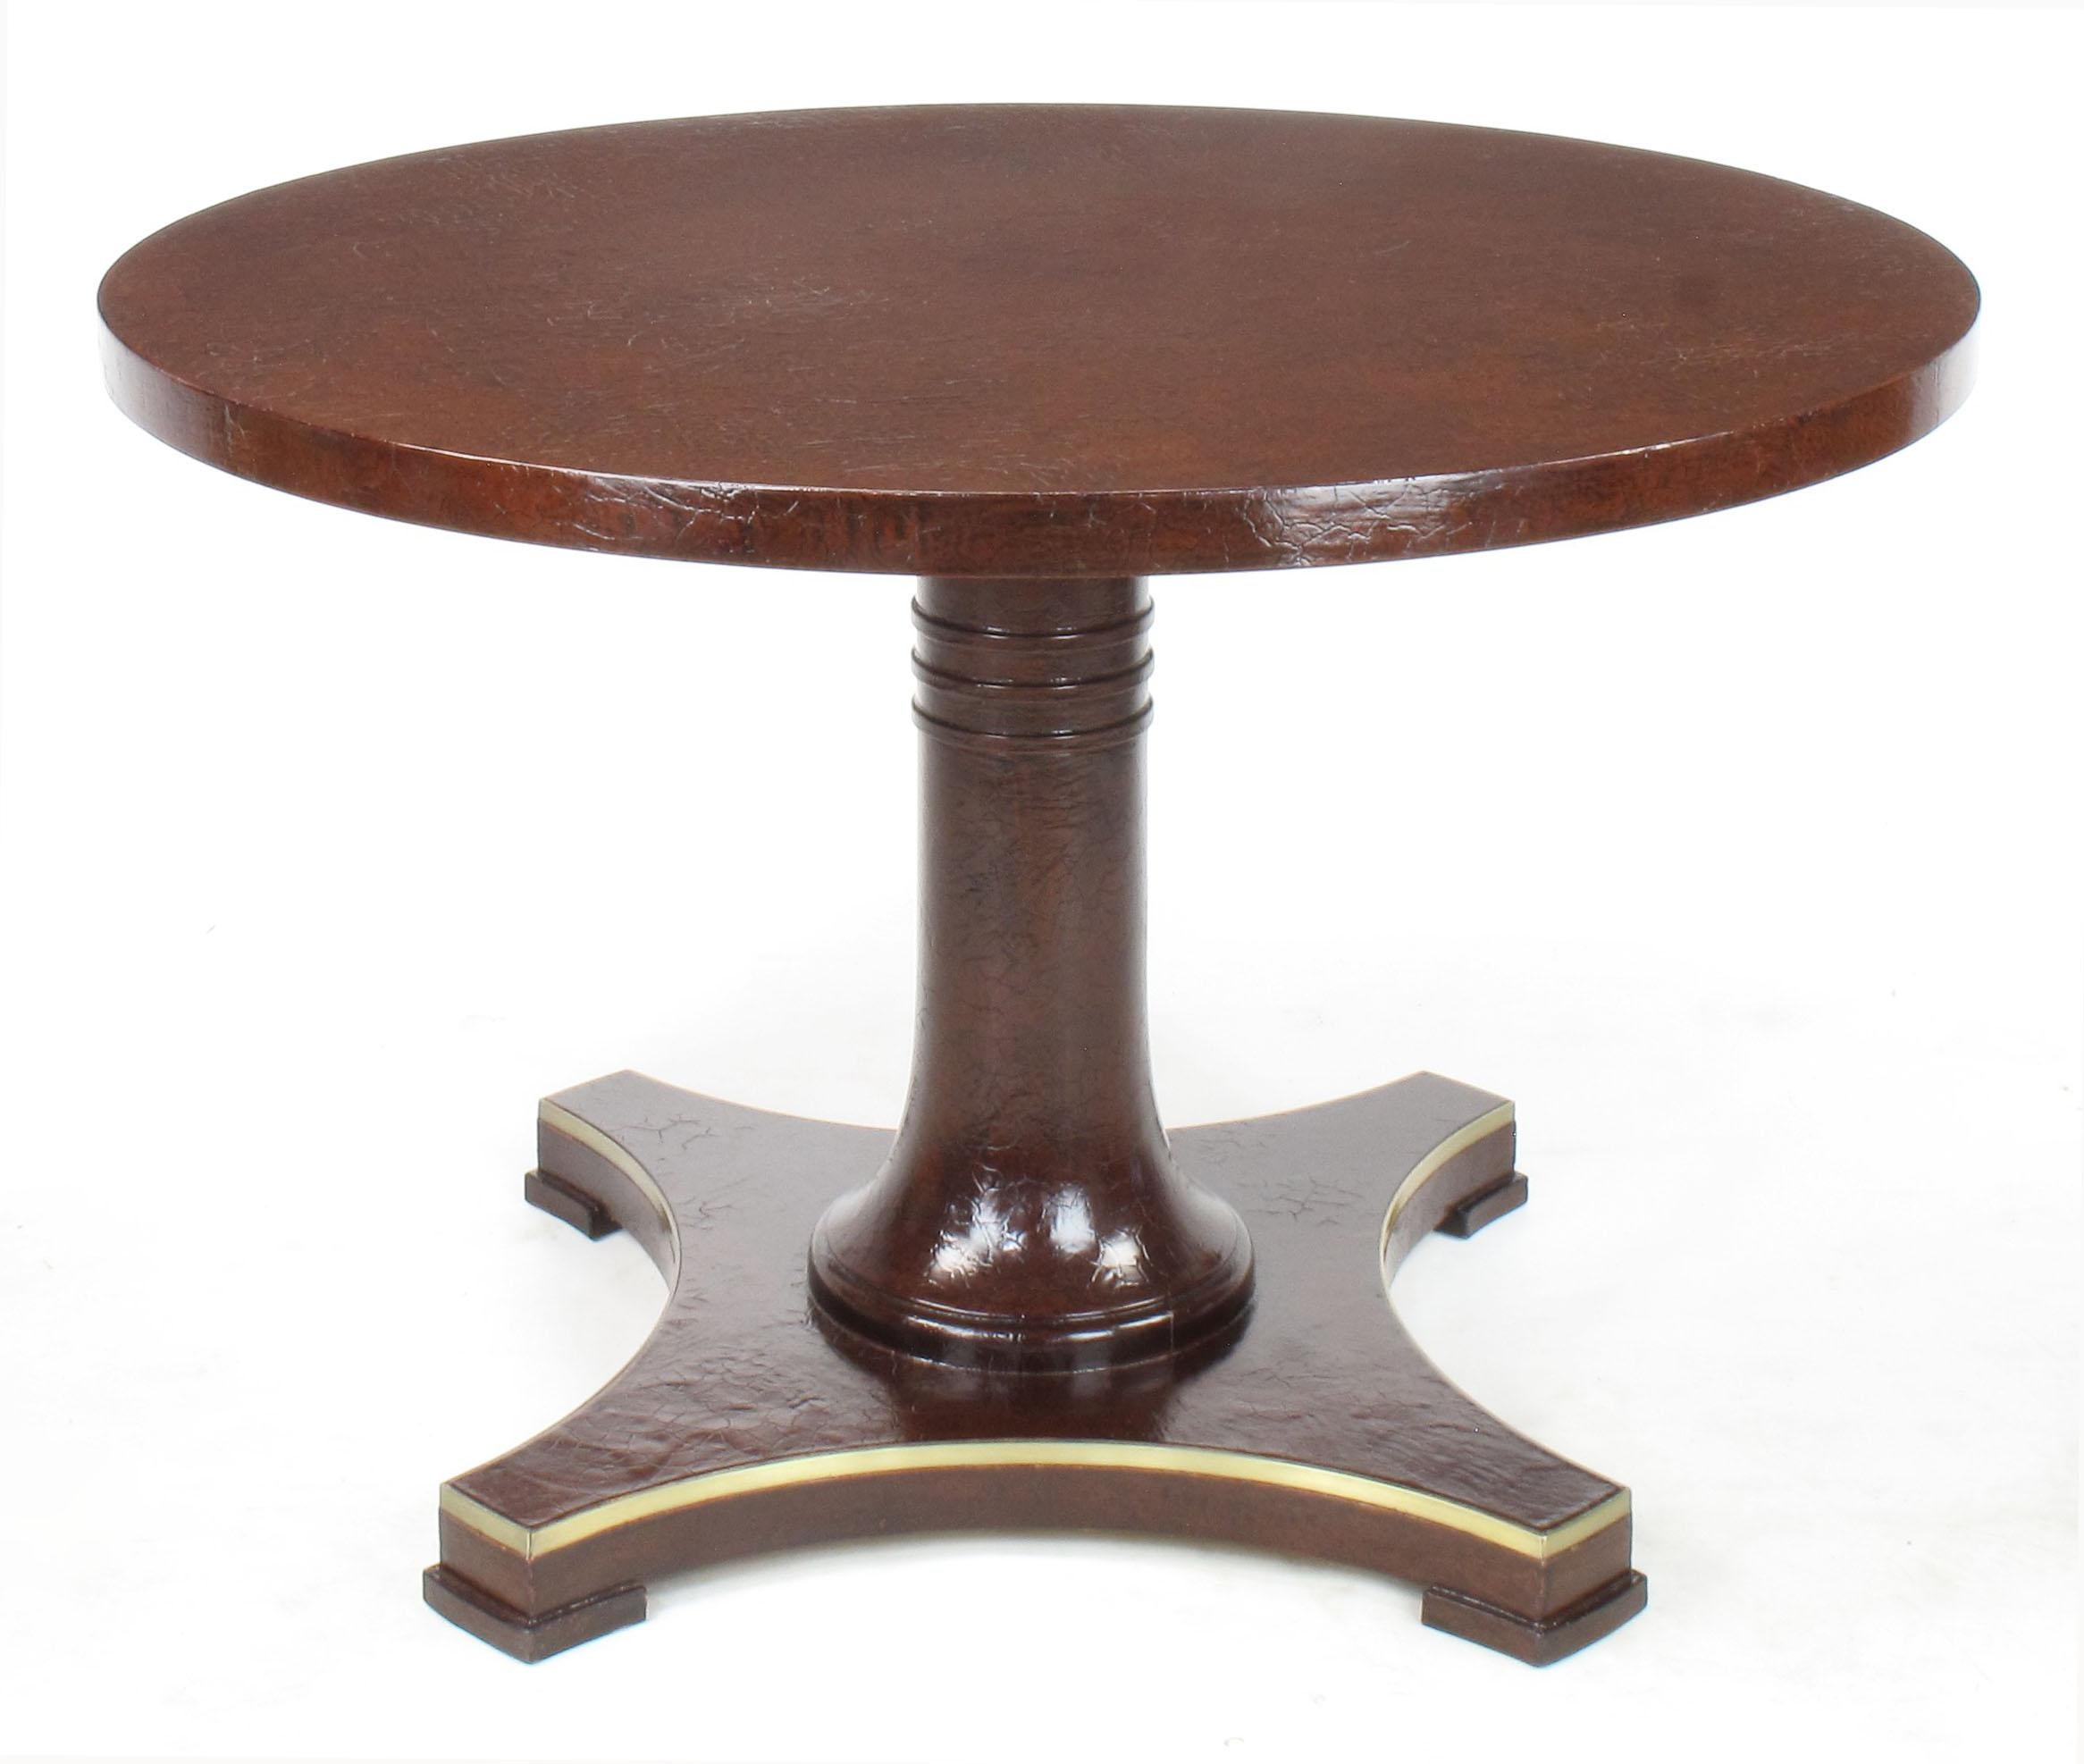 Baker Furniture oxblood lacquer pedestal games table with craquelure finish. The finish is offset by a black glaze that really makes the crackle finish pop. The base is a brass detailed reverse quatrefoil plinth and the center post features three